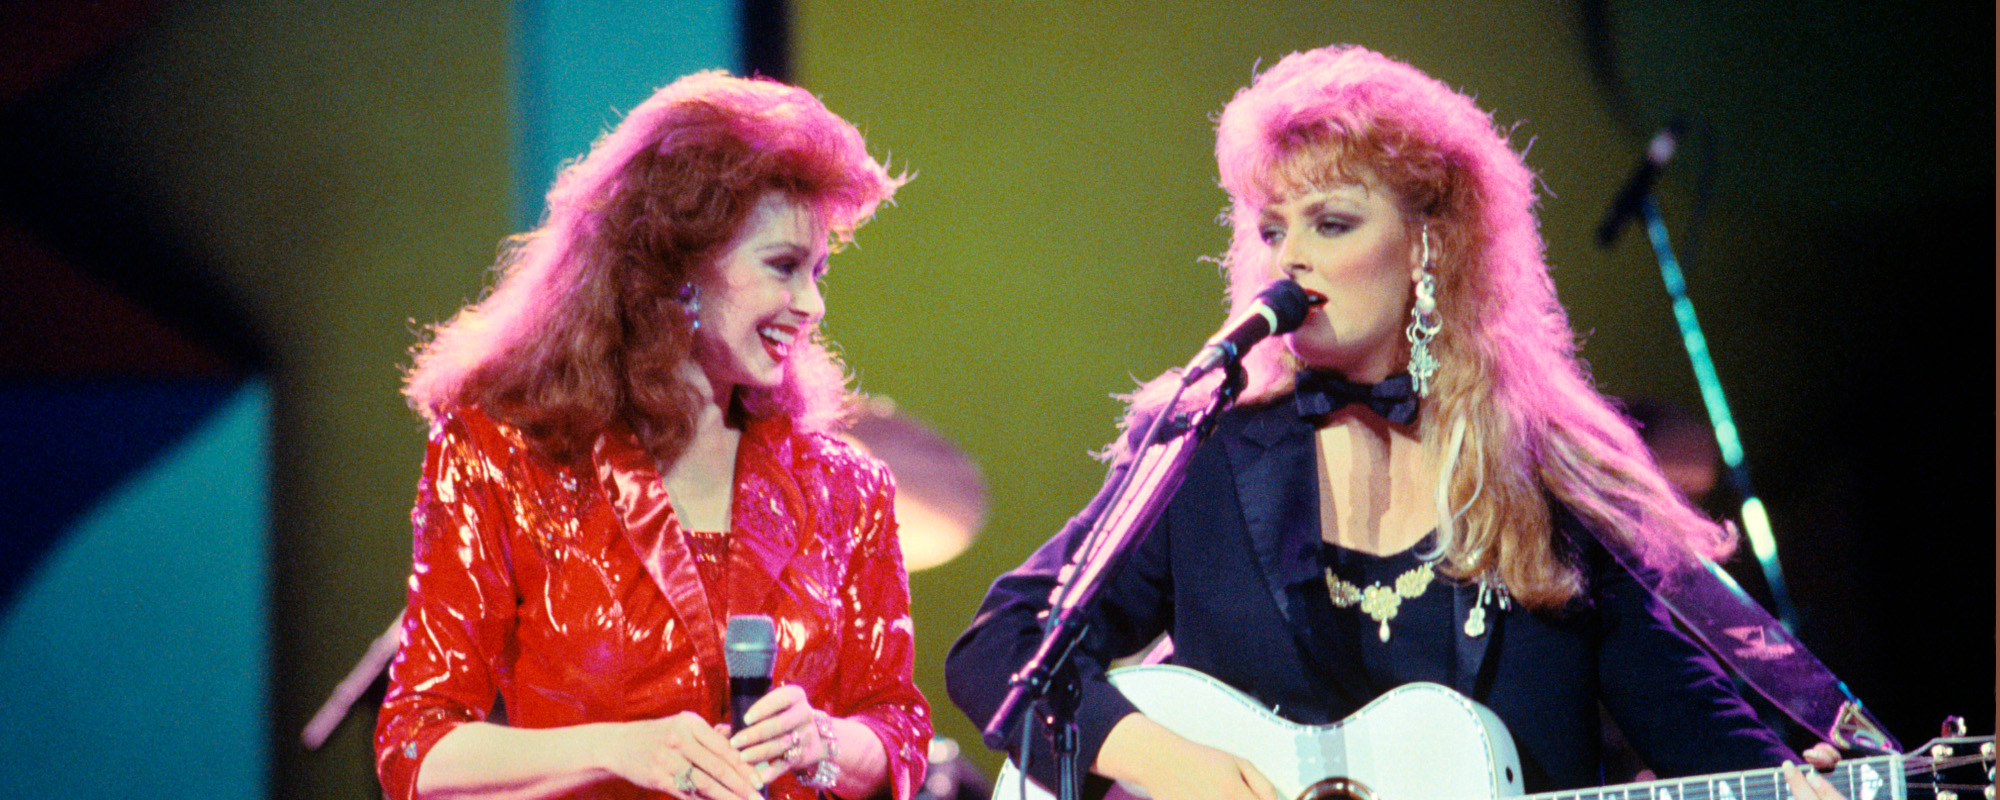 Top 10 Songs by The Judds (1984-1990)